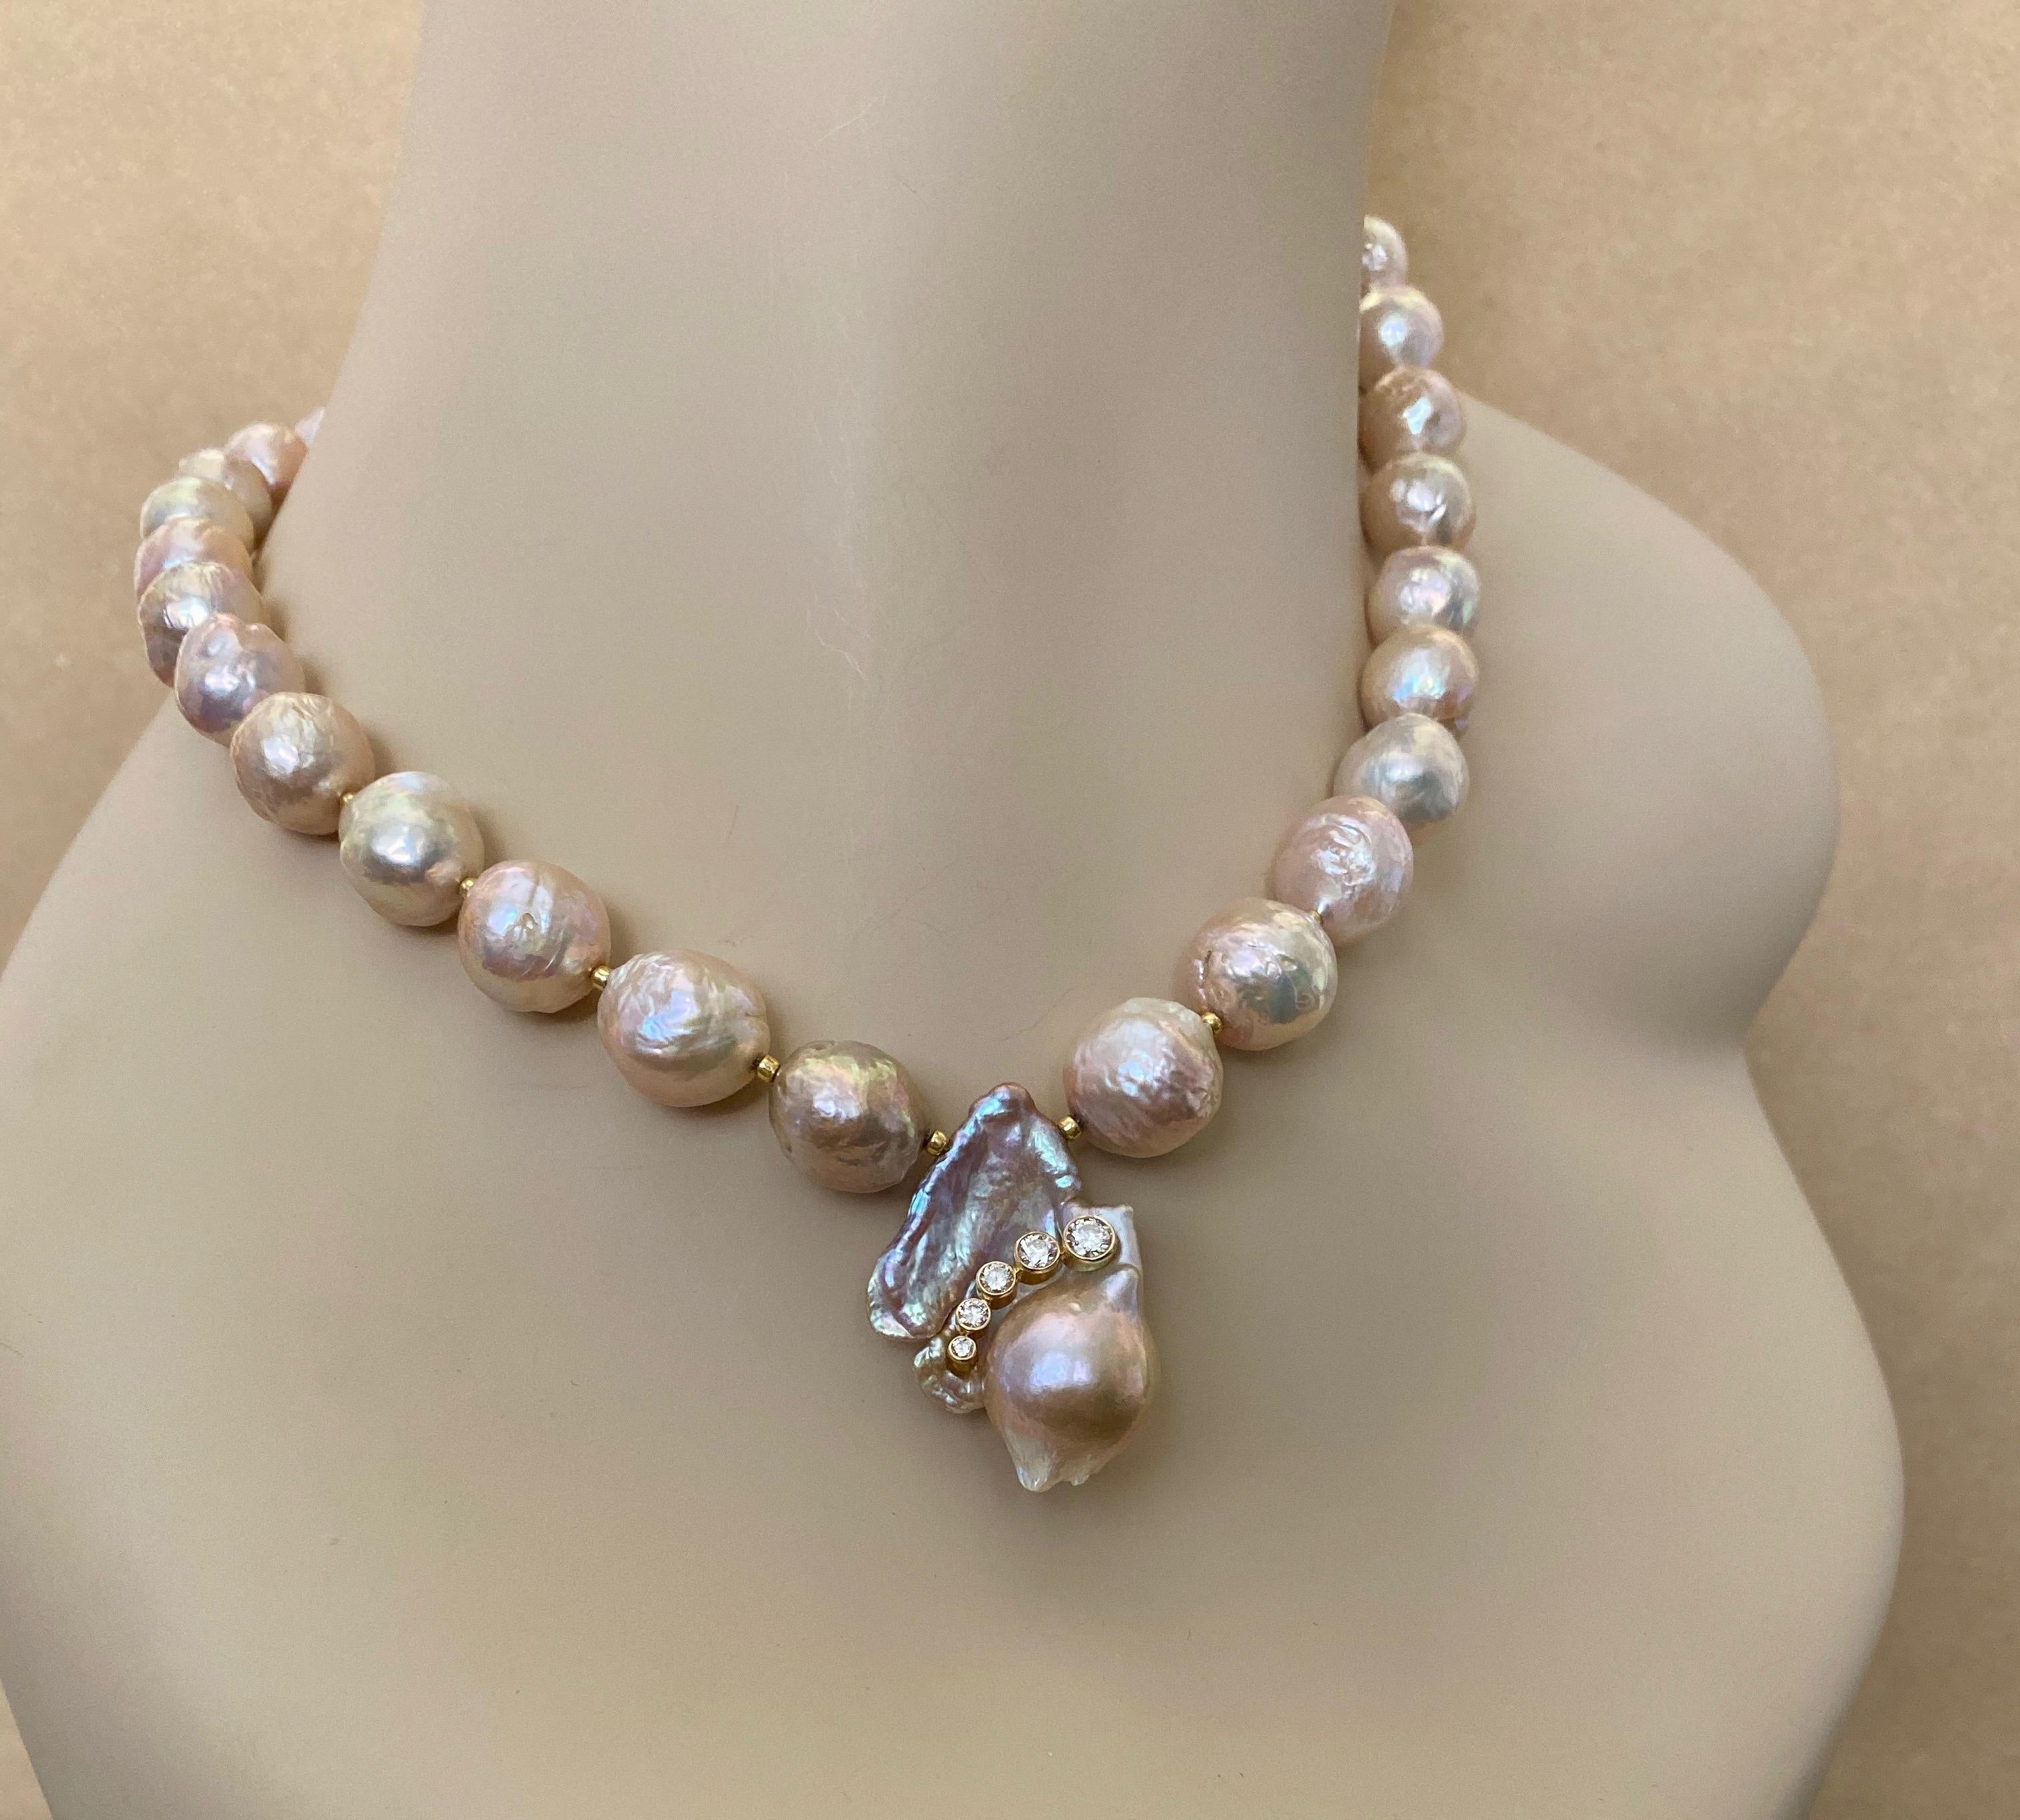 Offered here is a superb Kasumi pearl and diamond necklace.  Japanese Kasumi pearls are cultivated in a hybrid freshwater mussel.  They are propagated in the upstream areas of Lake Kasumi-ga-Ura, some 40 miles northwest of Tokyo.  Kasumi pearls are